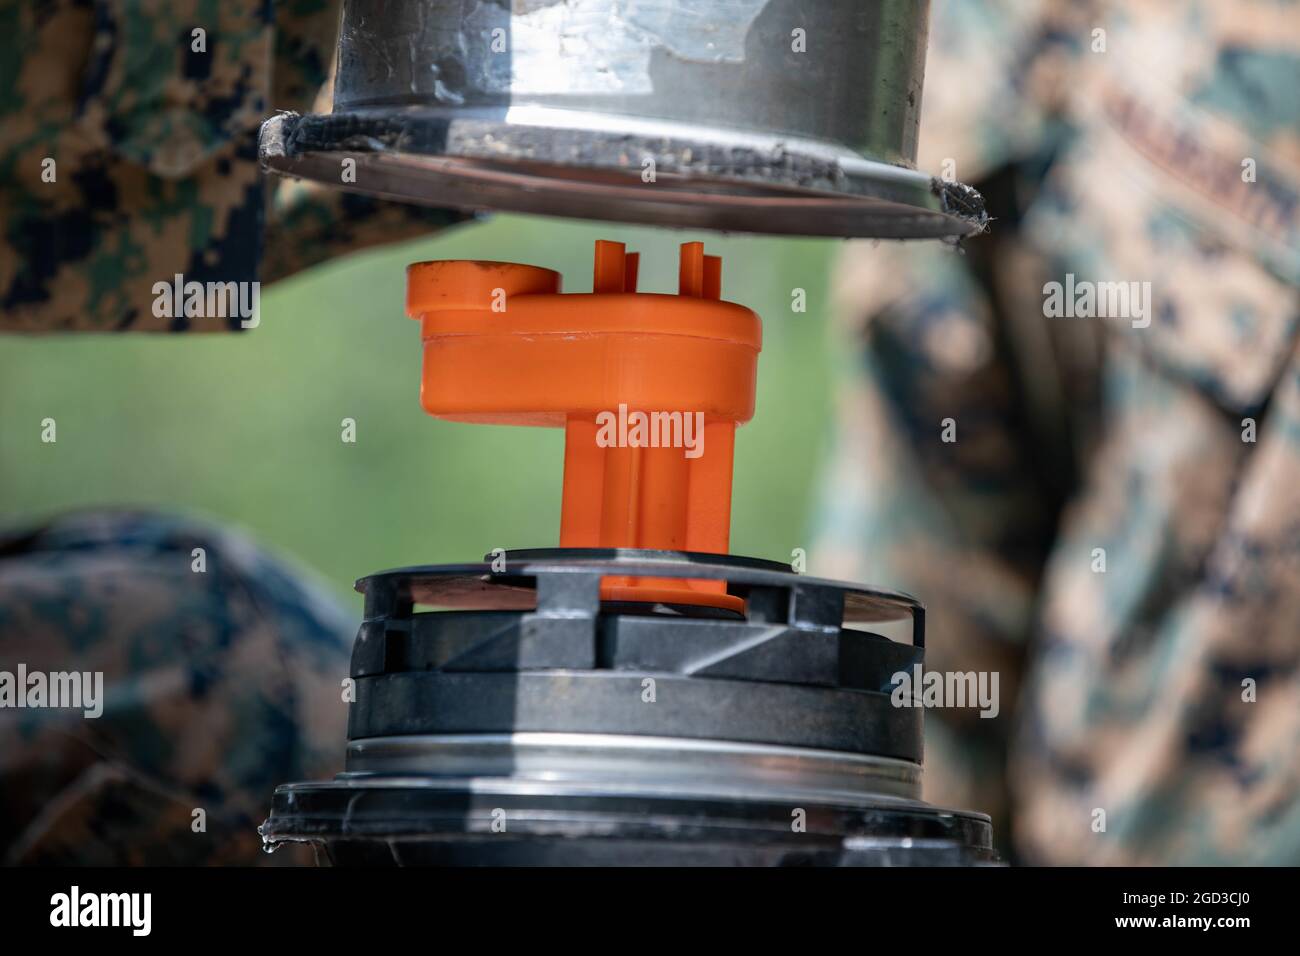 Marines with Combat Logistics Battalion 451, 4th Marine Logistics Group, replace a component of a water pump with one 3D-printed in the field during Northern Strike 21-2 at Camp Grayling, Michigan on Aug 7, 2021. Marines with Marine Force Reserve support Northern Strike 21-2, an exercise that can sustain and build readiness. (U.S. Marine Corps photo by Lance Cpl. Colby Bundy) Stock Photo